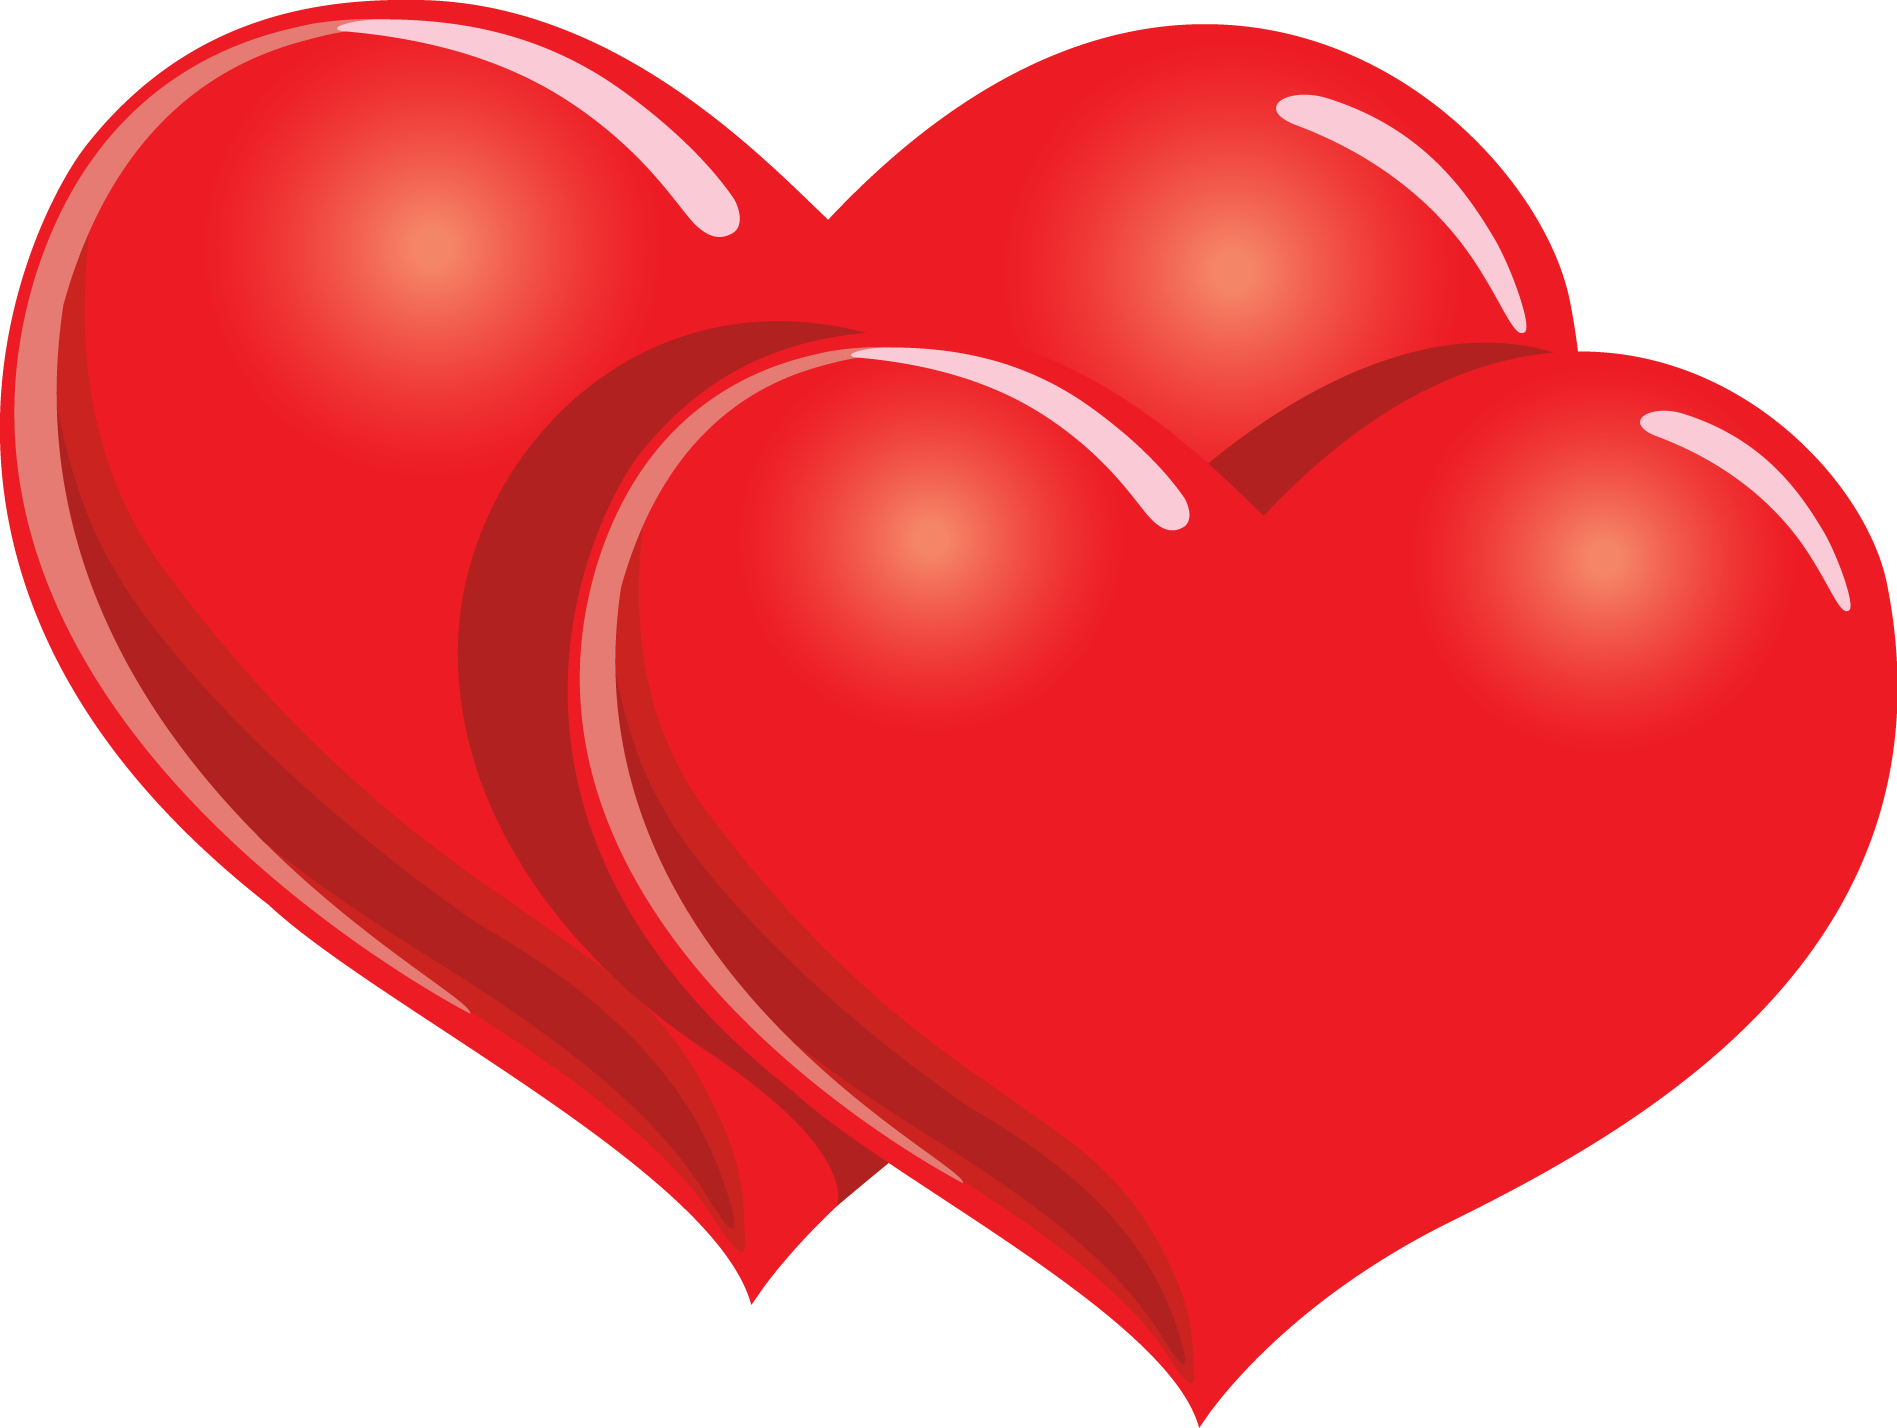 sunset clipart two red heart